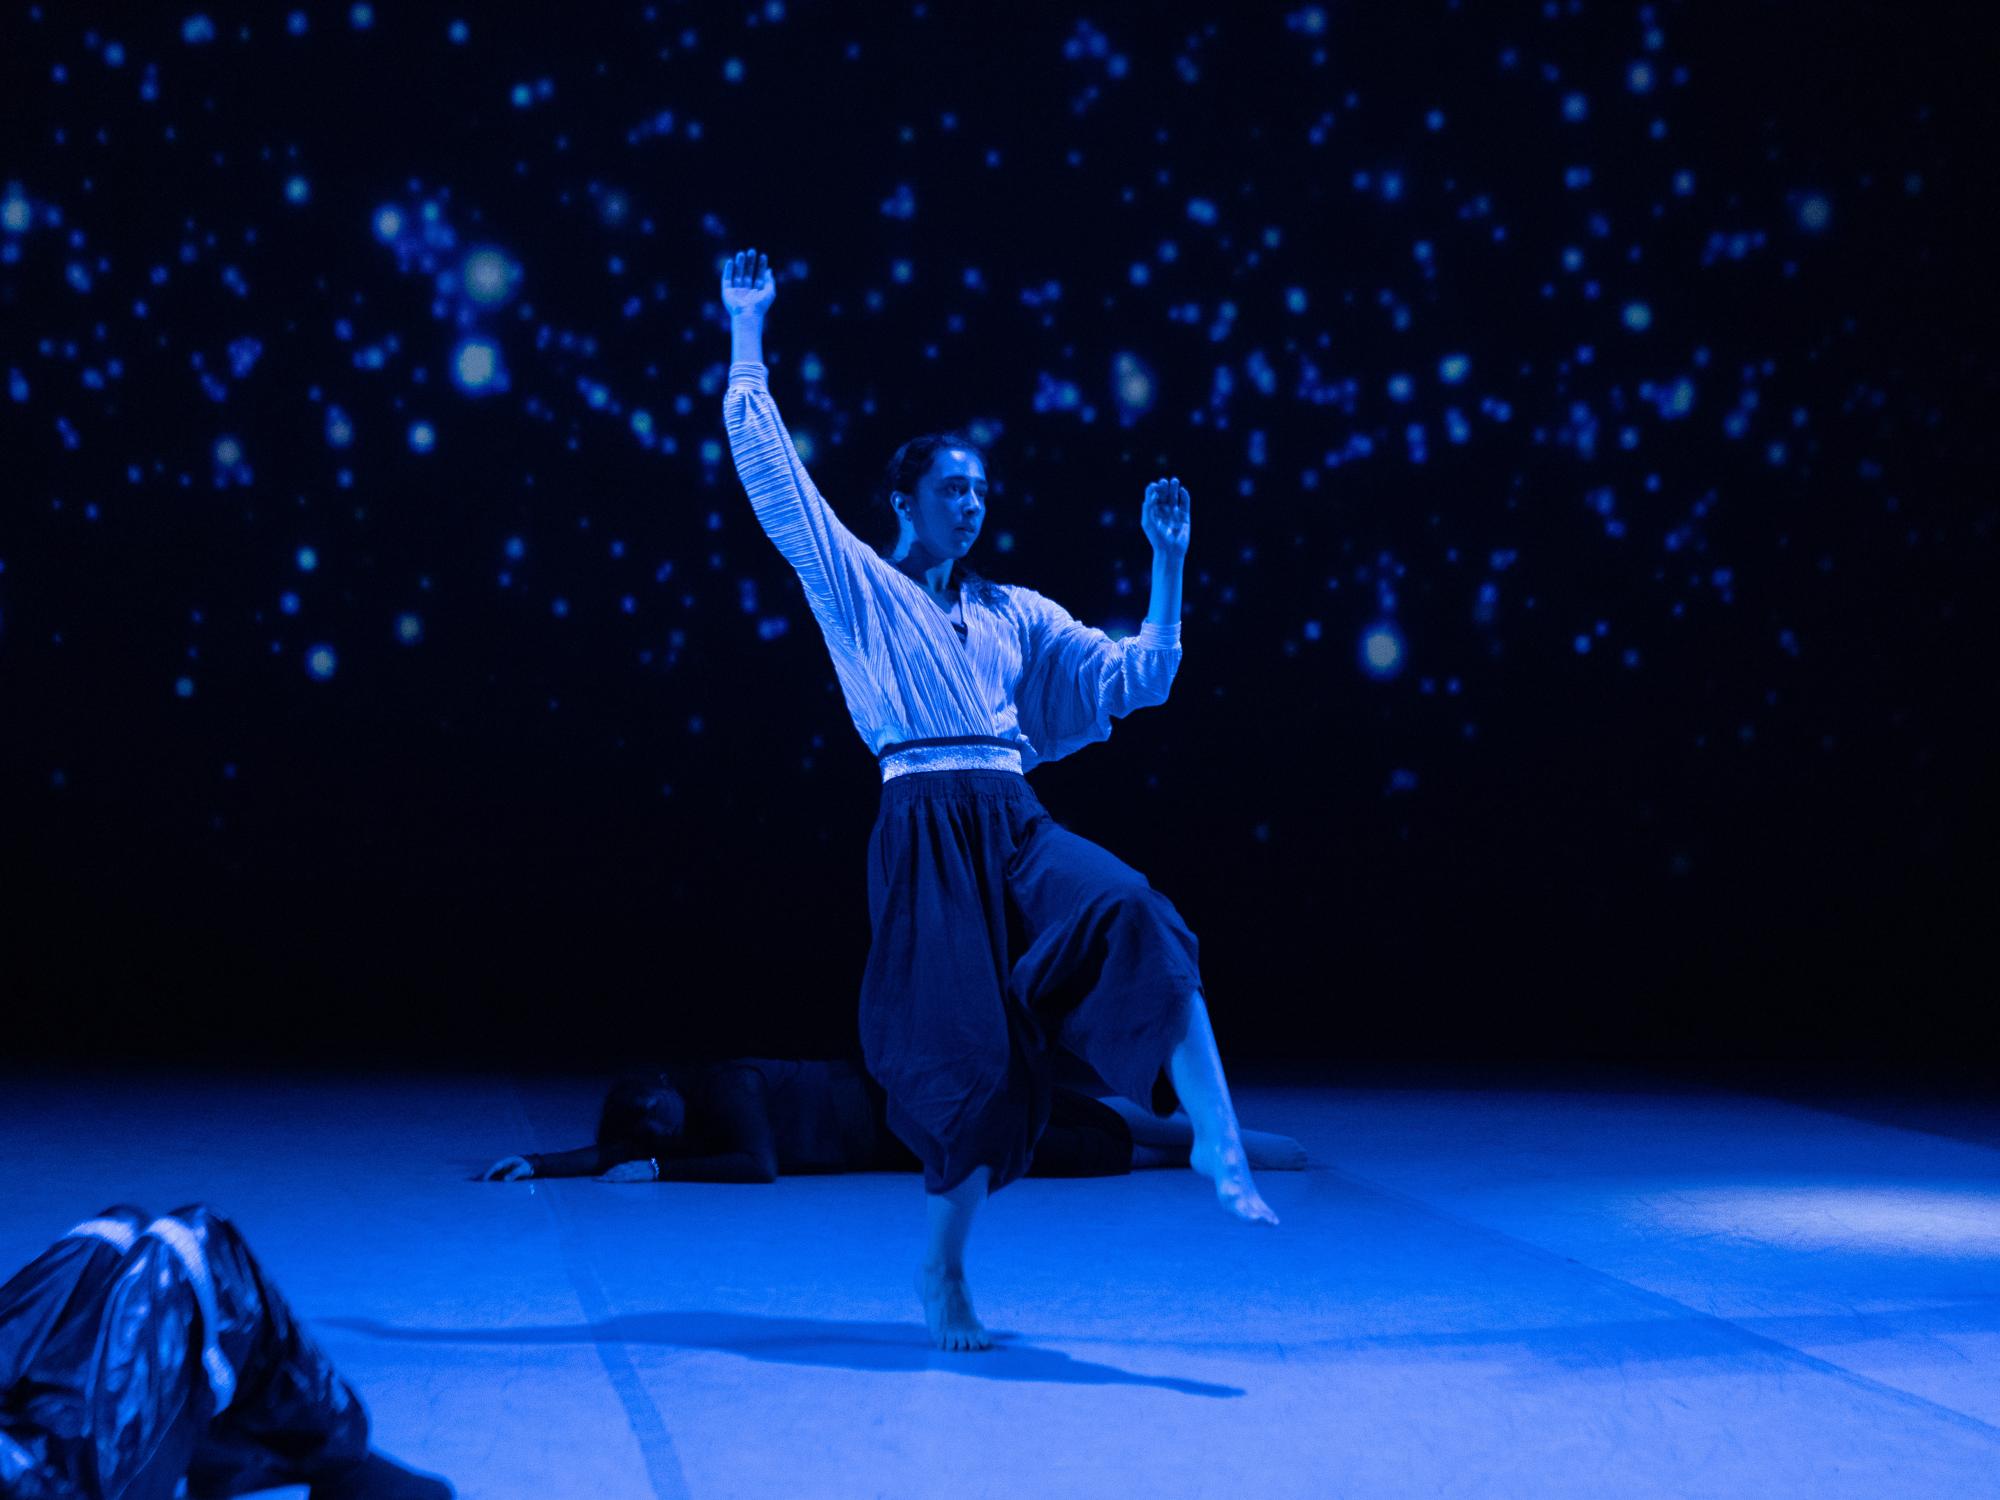 dancer reaches her right arm up and her left leg up slightly, washed in blue light